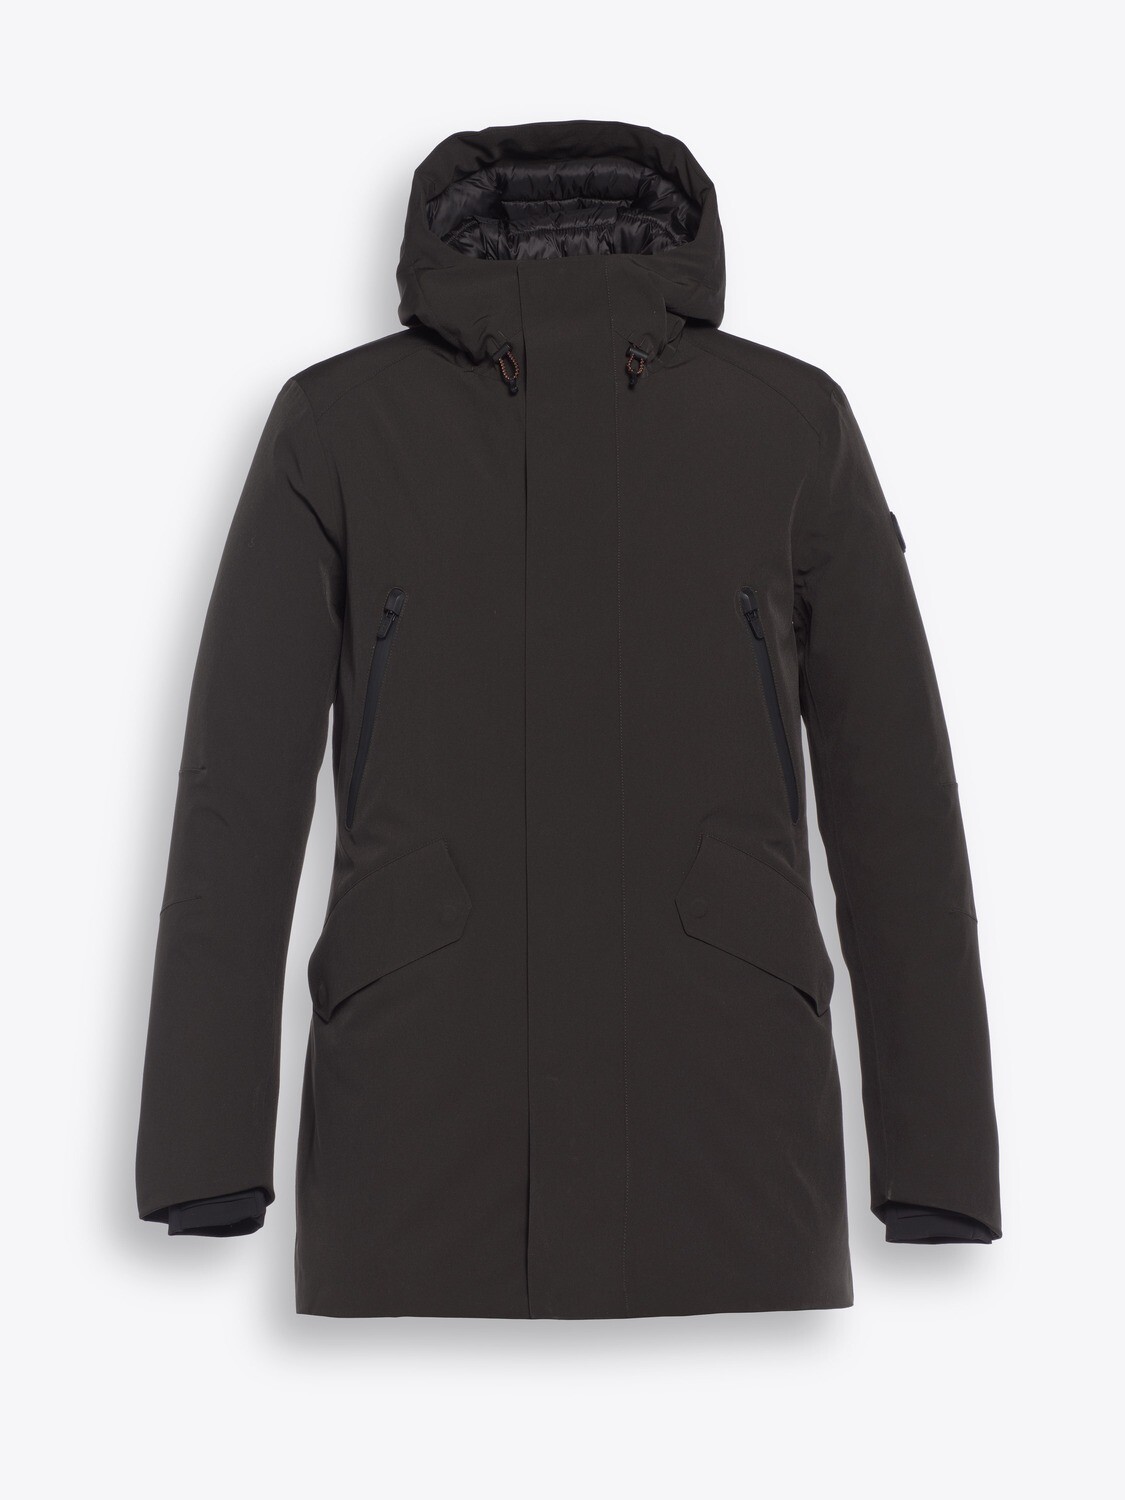 MR00230223 Outerwear functional long